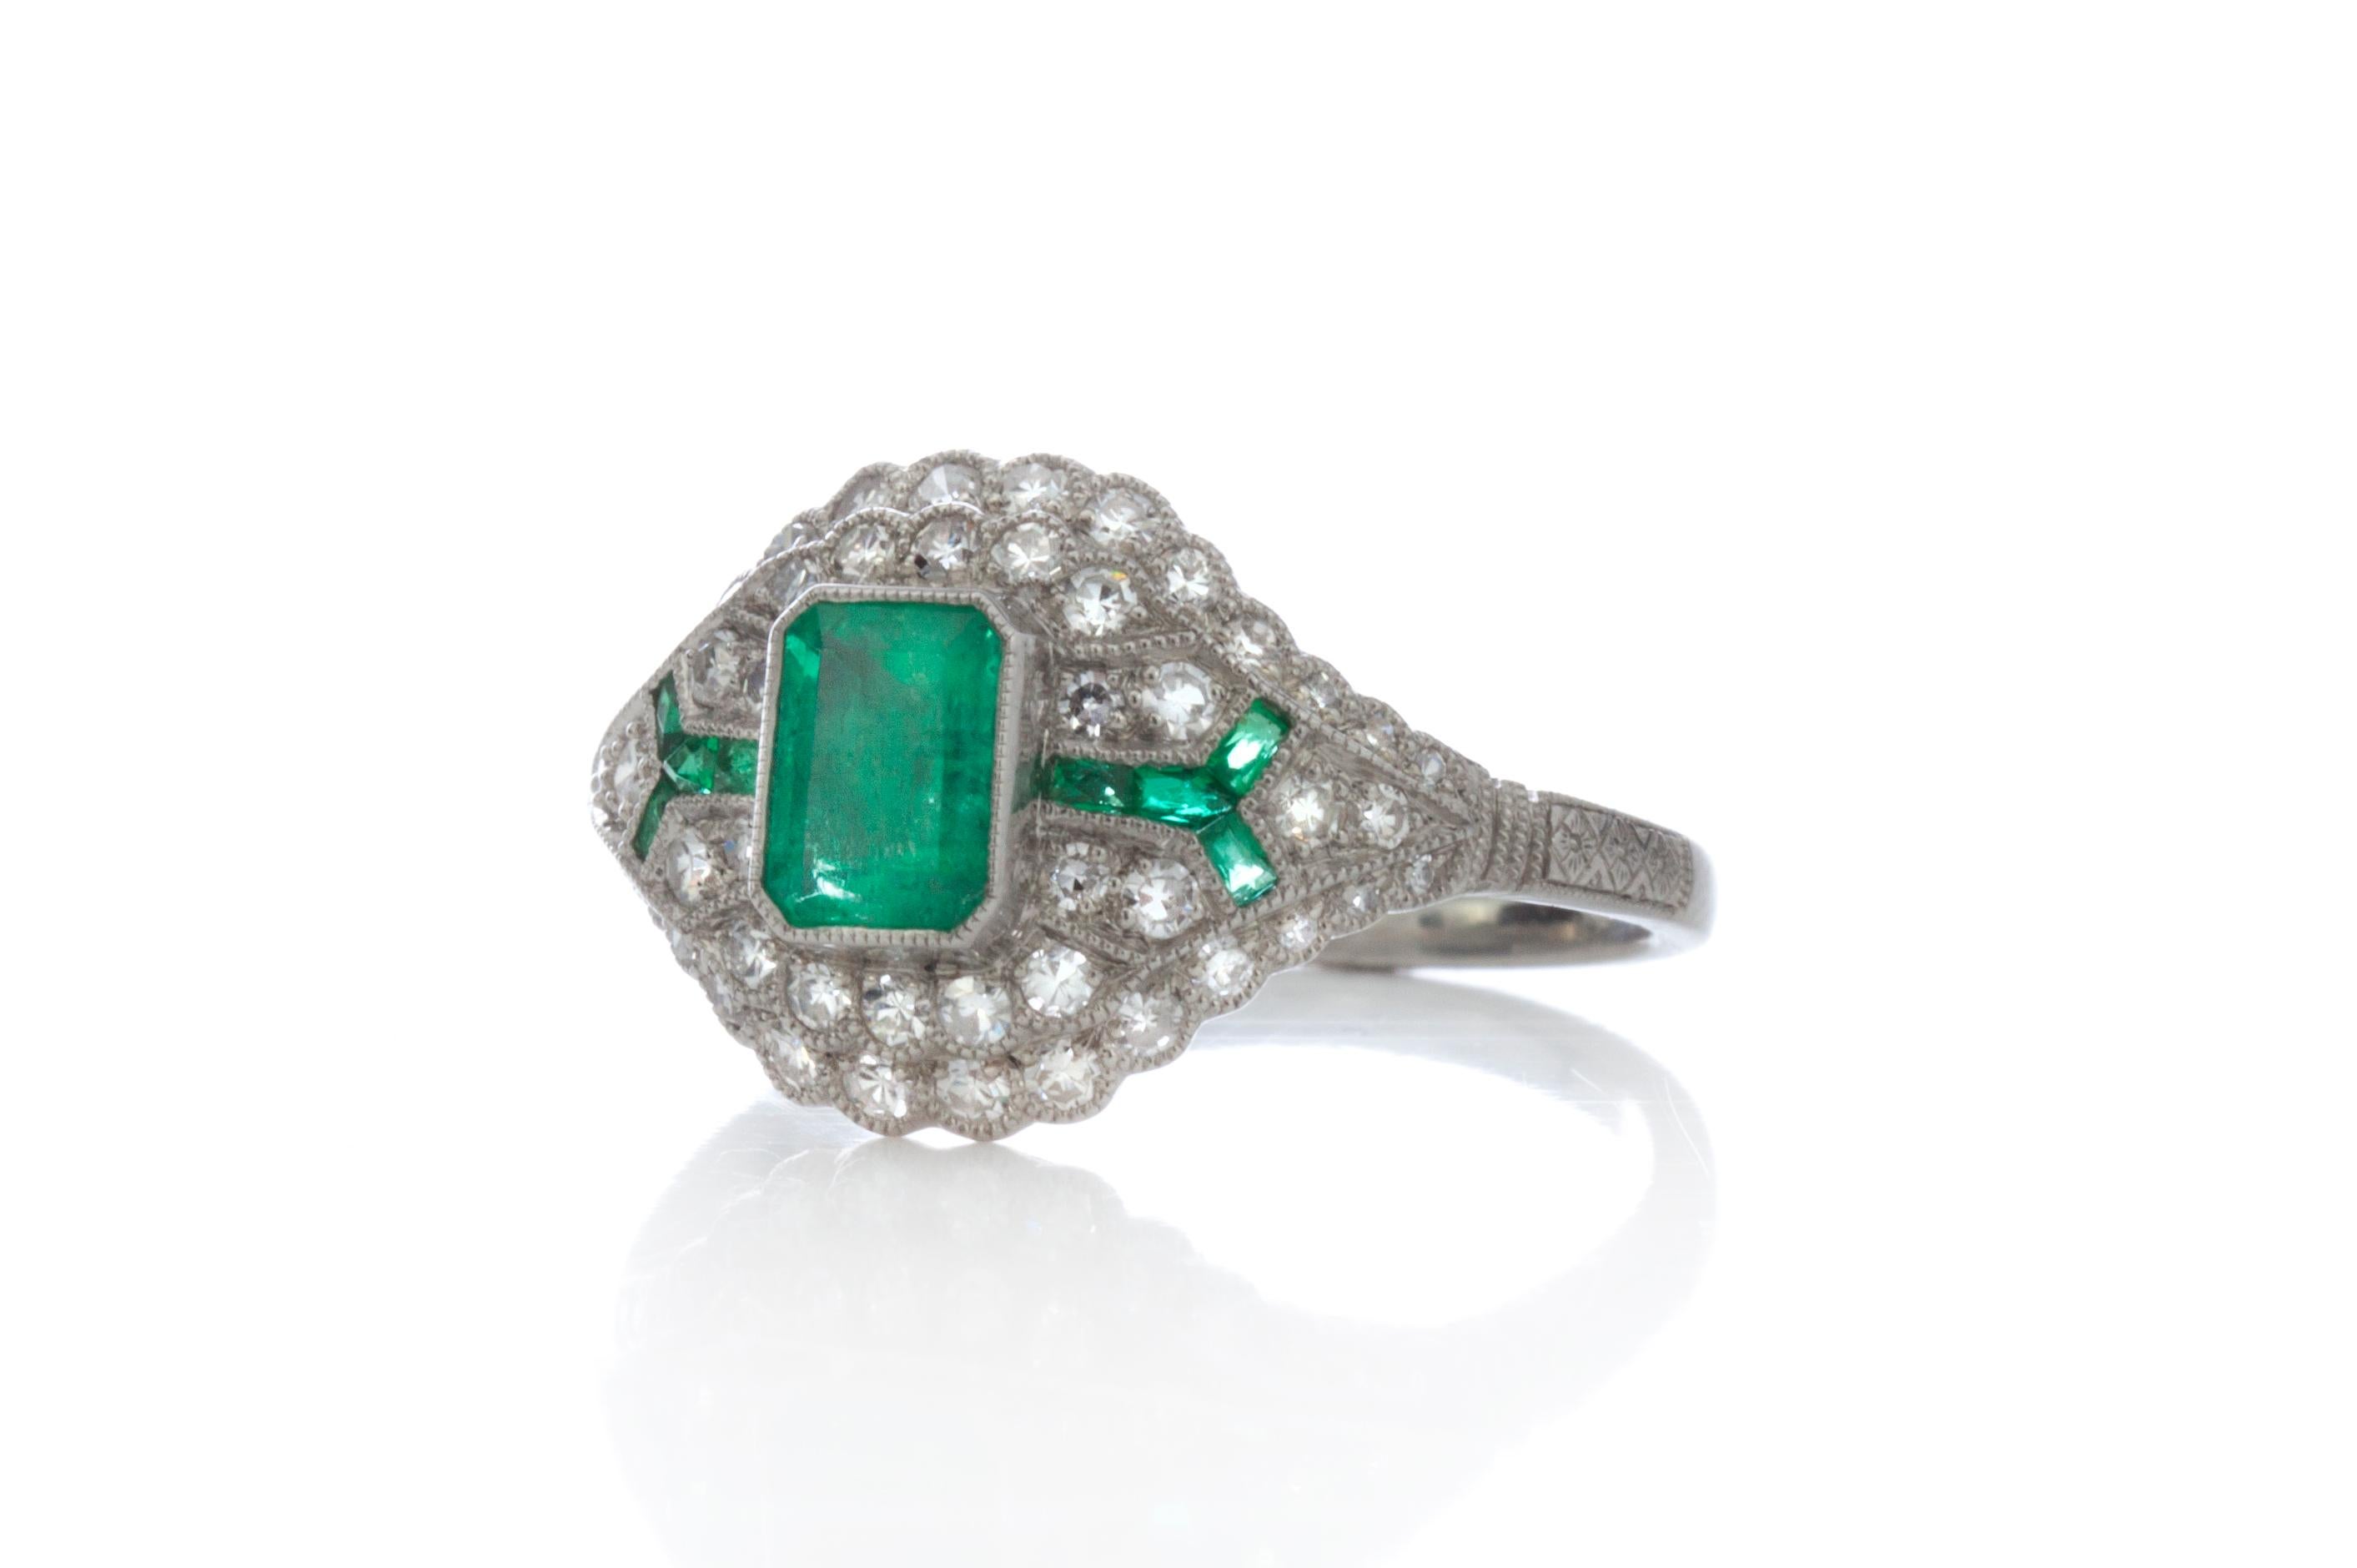 Platinum art deco inspired emerald and diamond ring
Made in 1980's
Ring is hallmarked PLAT (.950 platinum purity_=)
Hallmarked 0.55 ct for Emerald weight

Dimensions - 
Ring Size (UK) = N (EU) = 54 (US) = 7
Weight: 4.65 grams
Size: 2.5 x 2 x 1.2